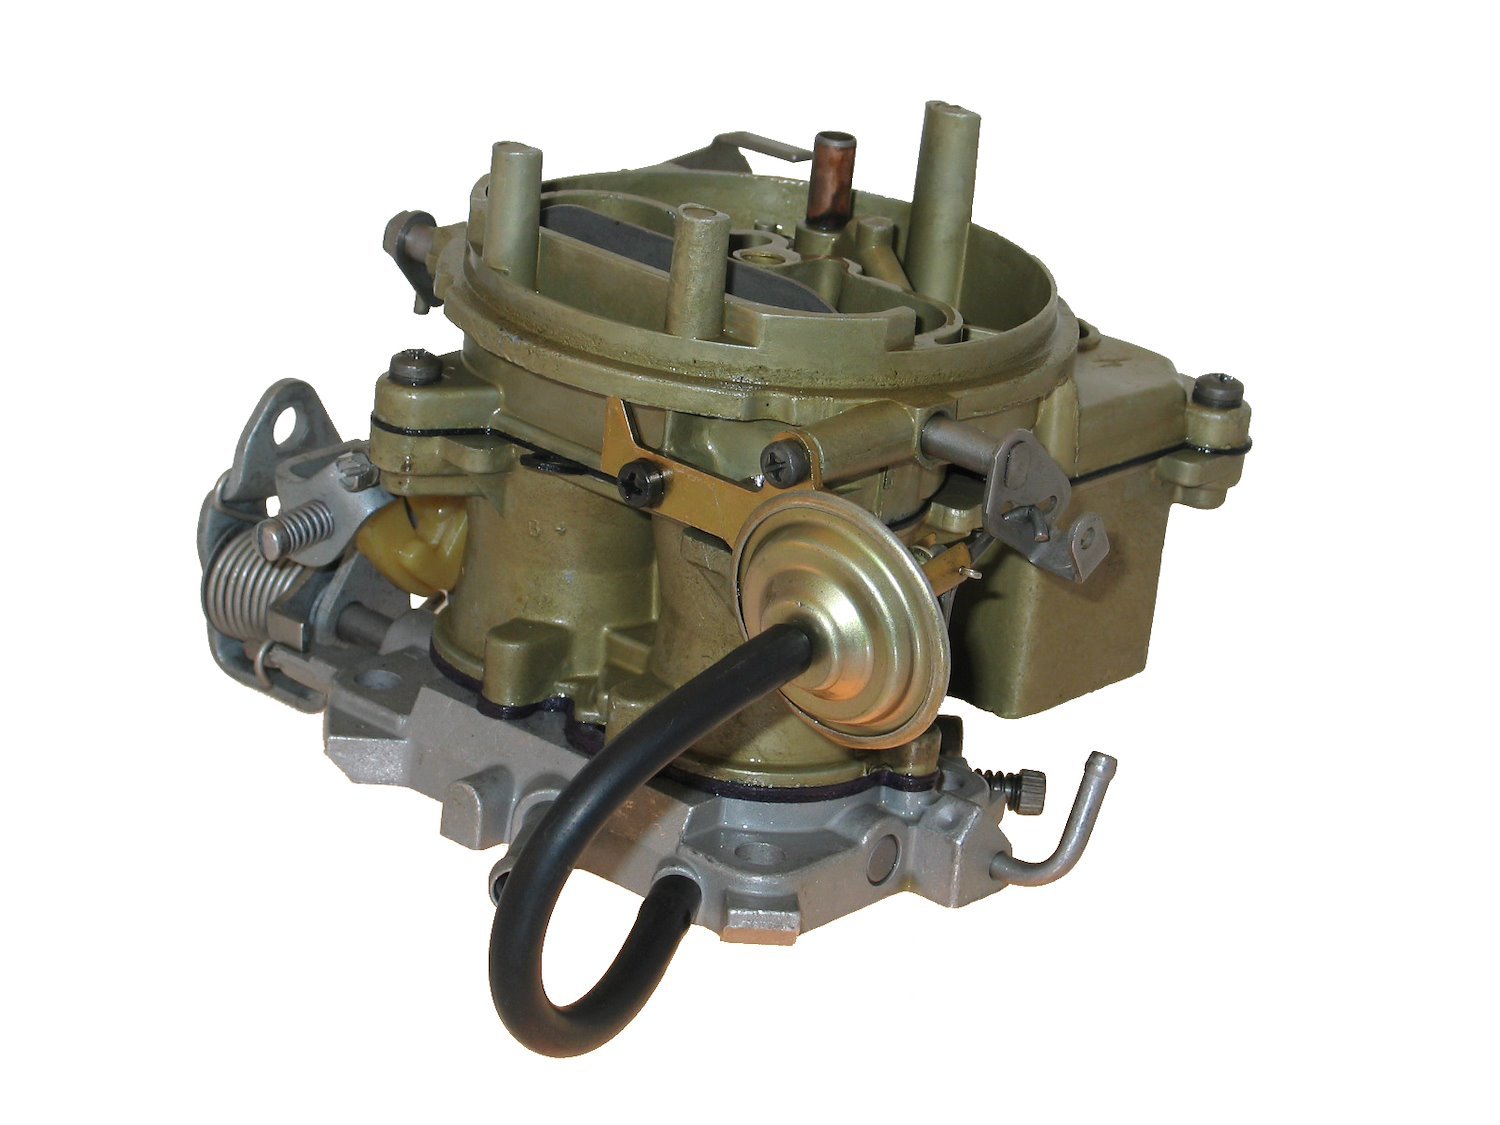 6-6244 Holley Remanufactured Carburetor, 2245, Heavy Duty-Style